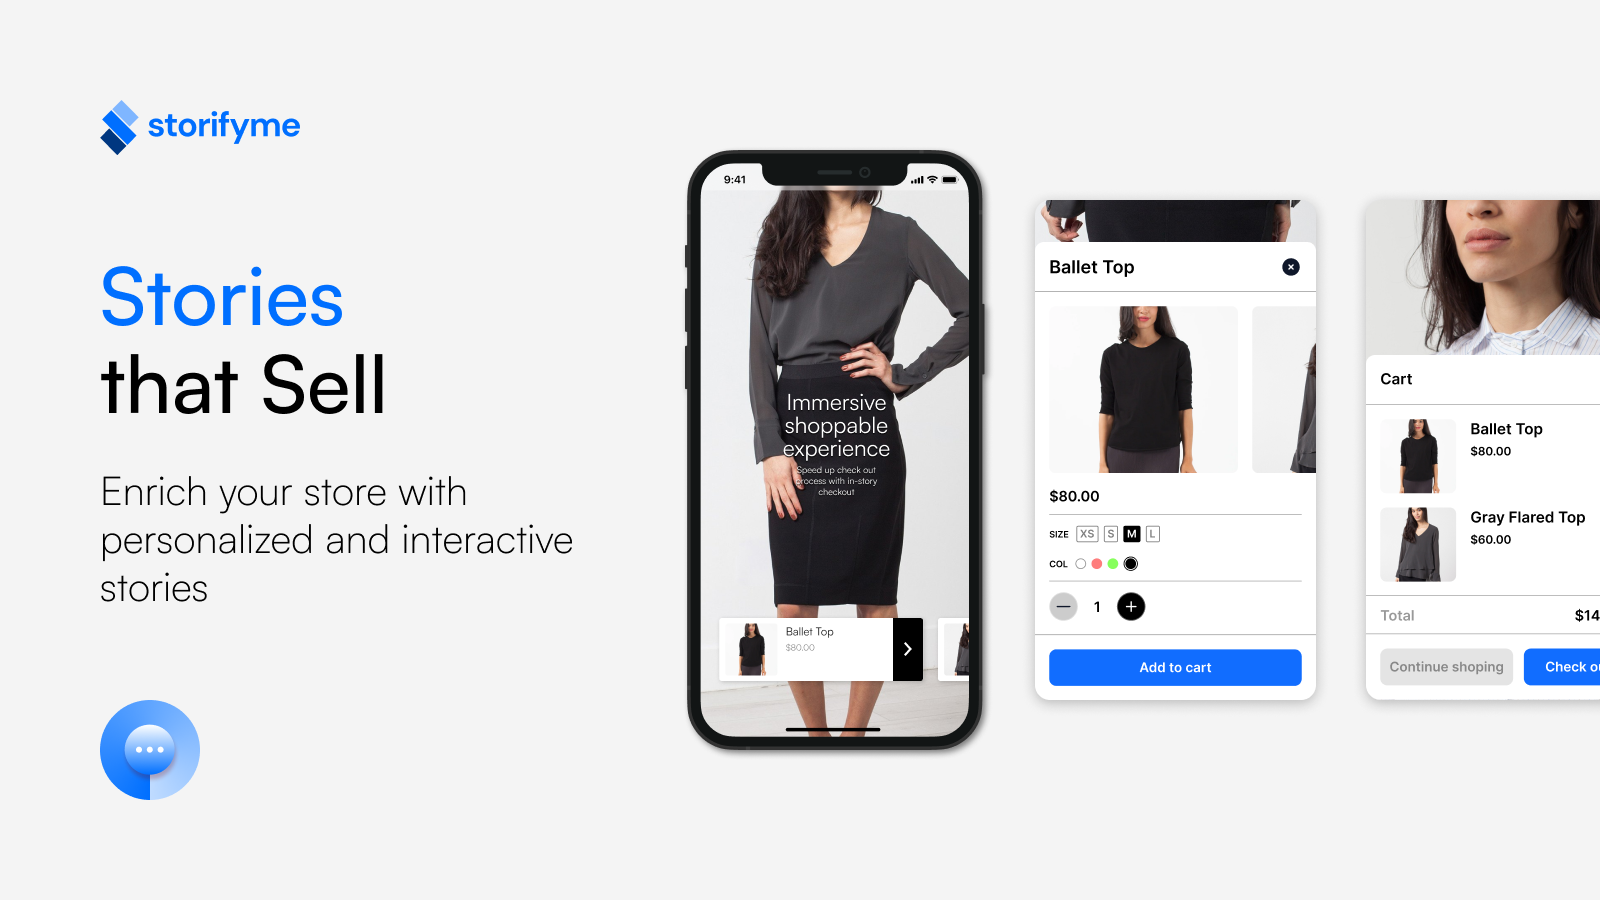 Immersive Shoppable Experience